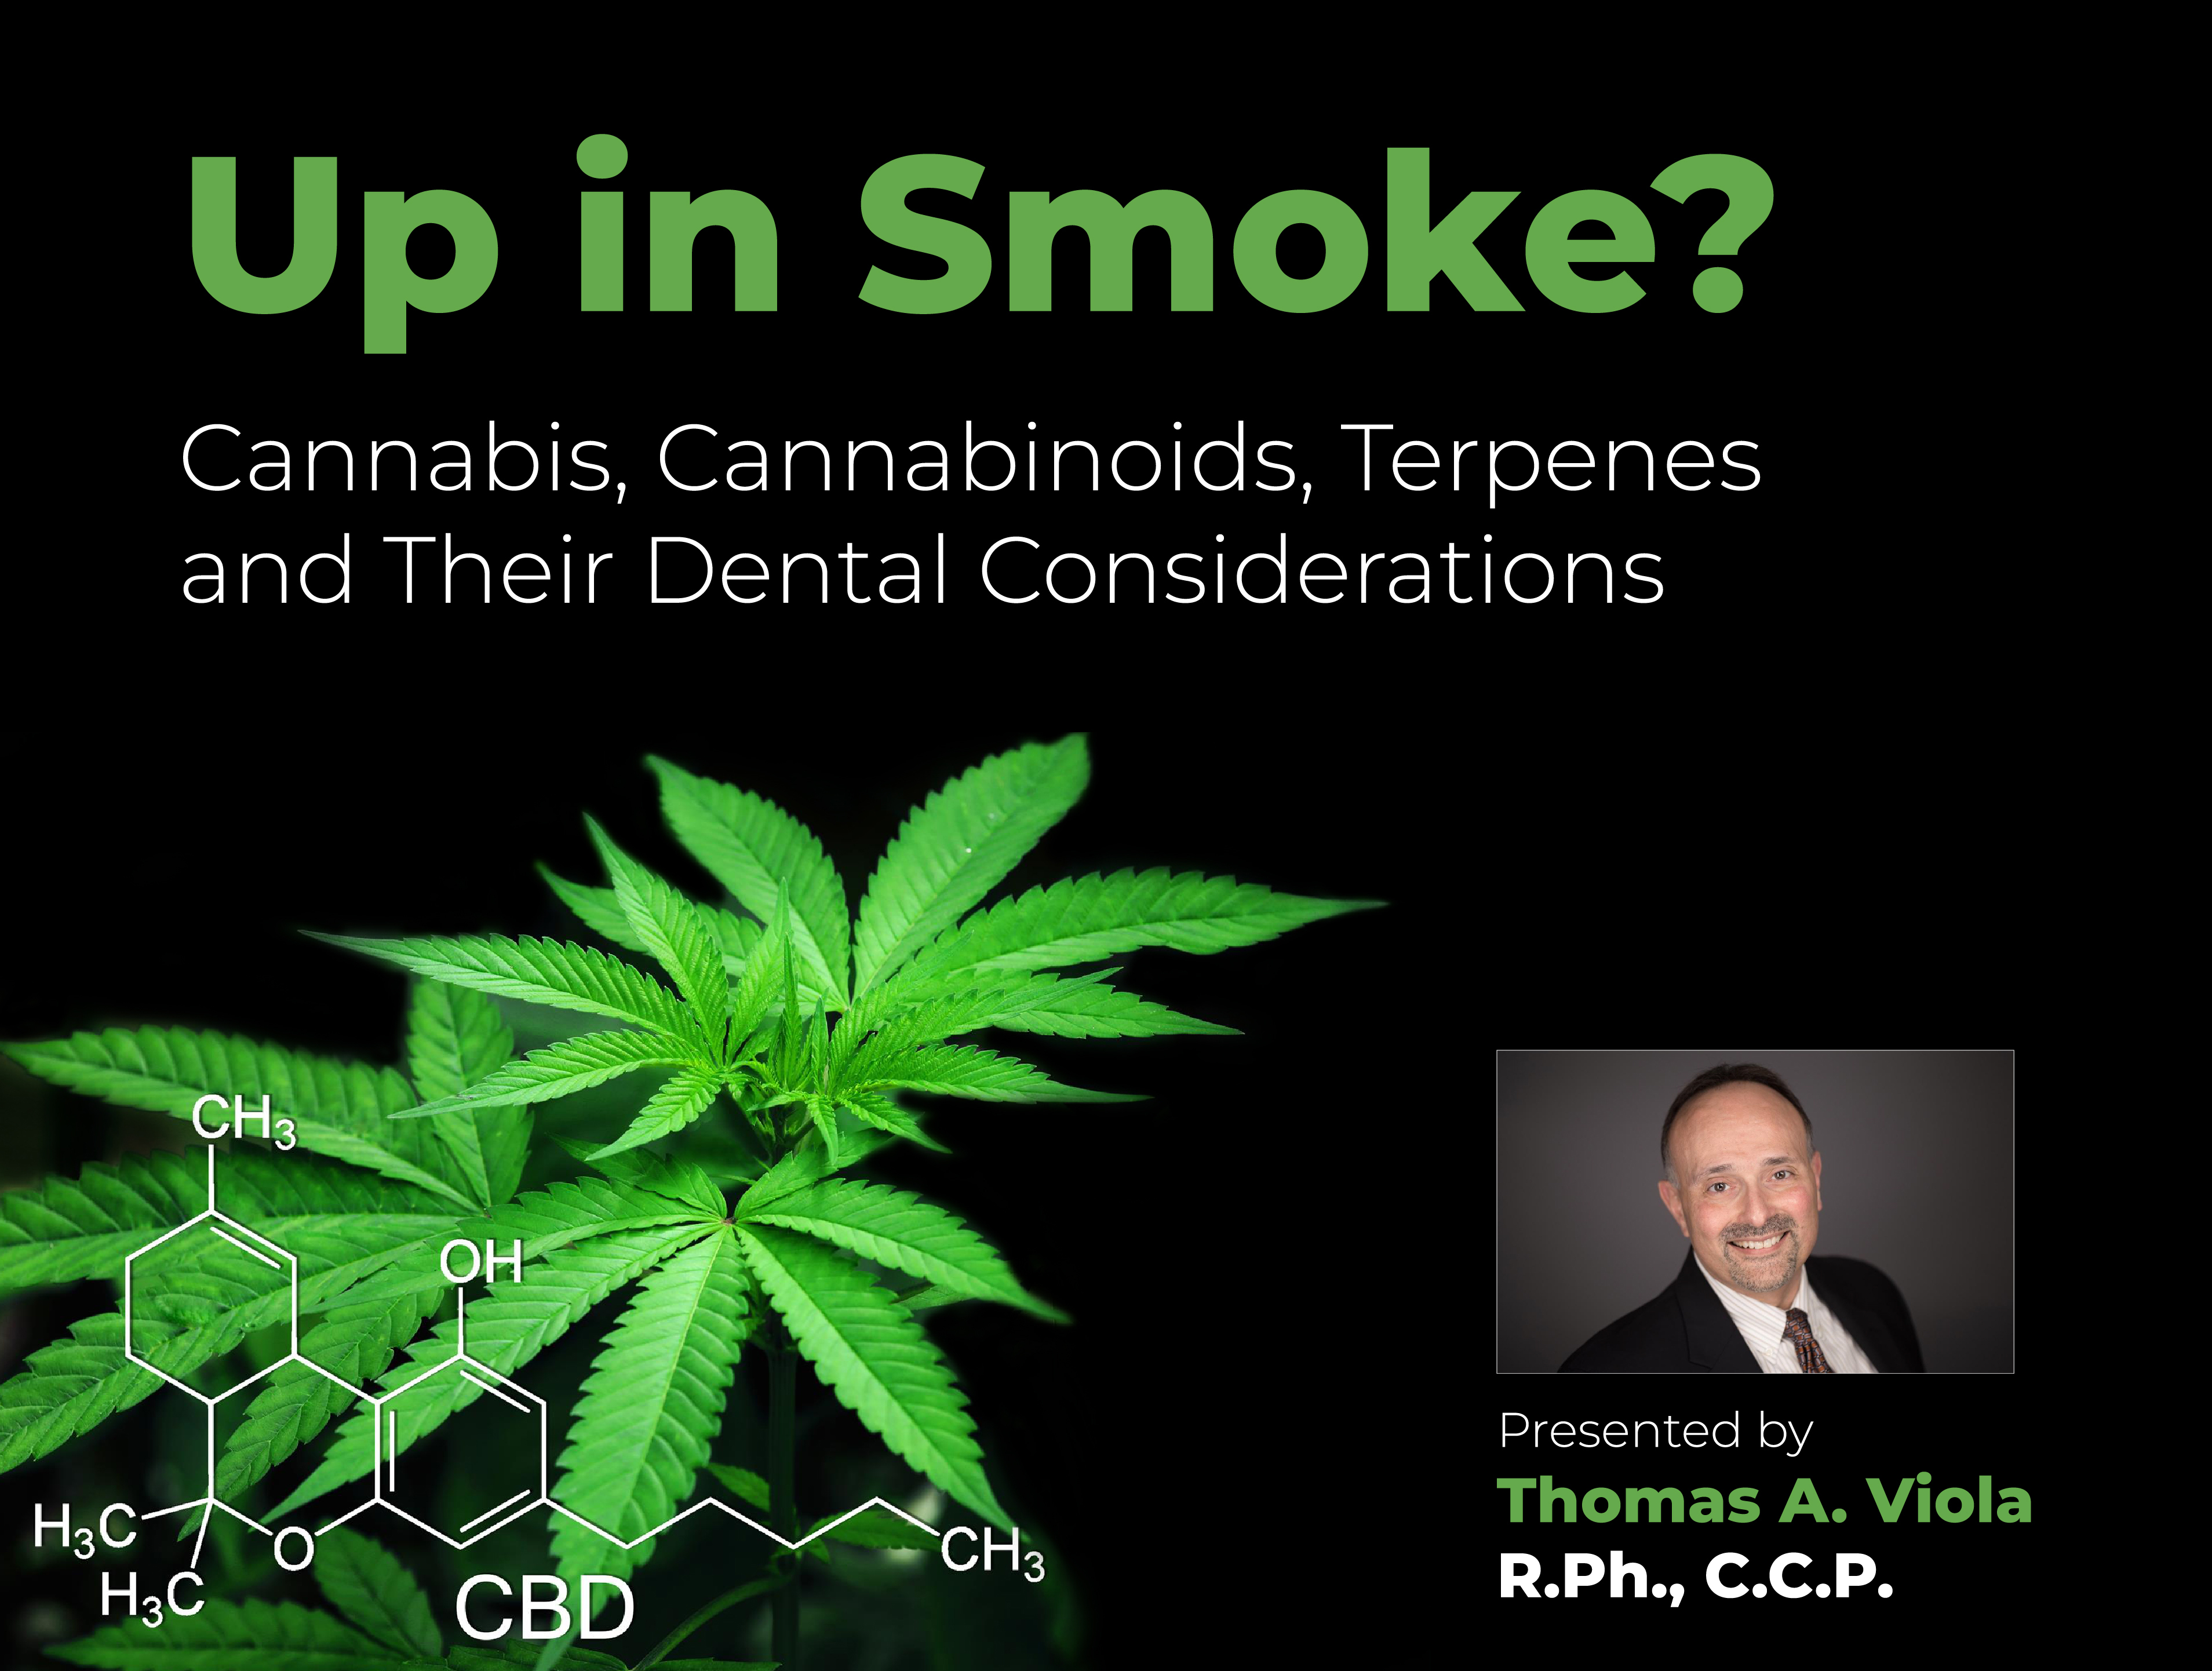 Up In Smoke: Cannabis, Cannabinoids, Terpenes and Their Dental Considerations